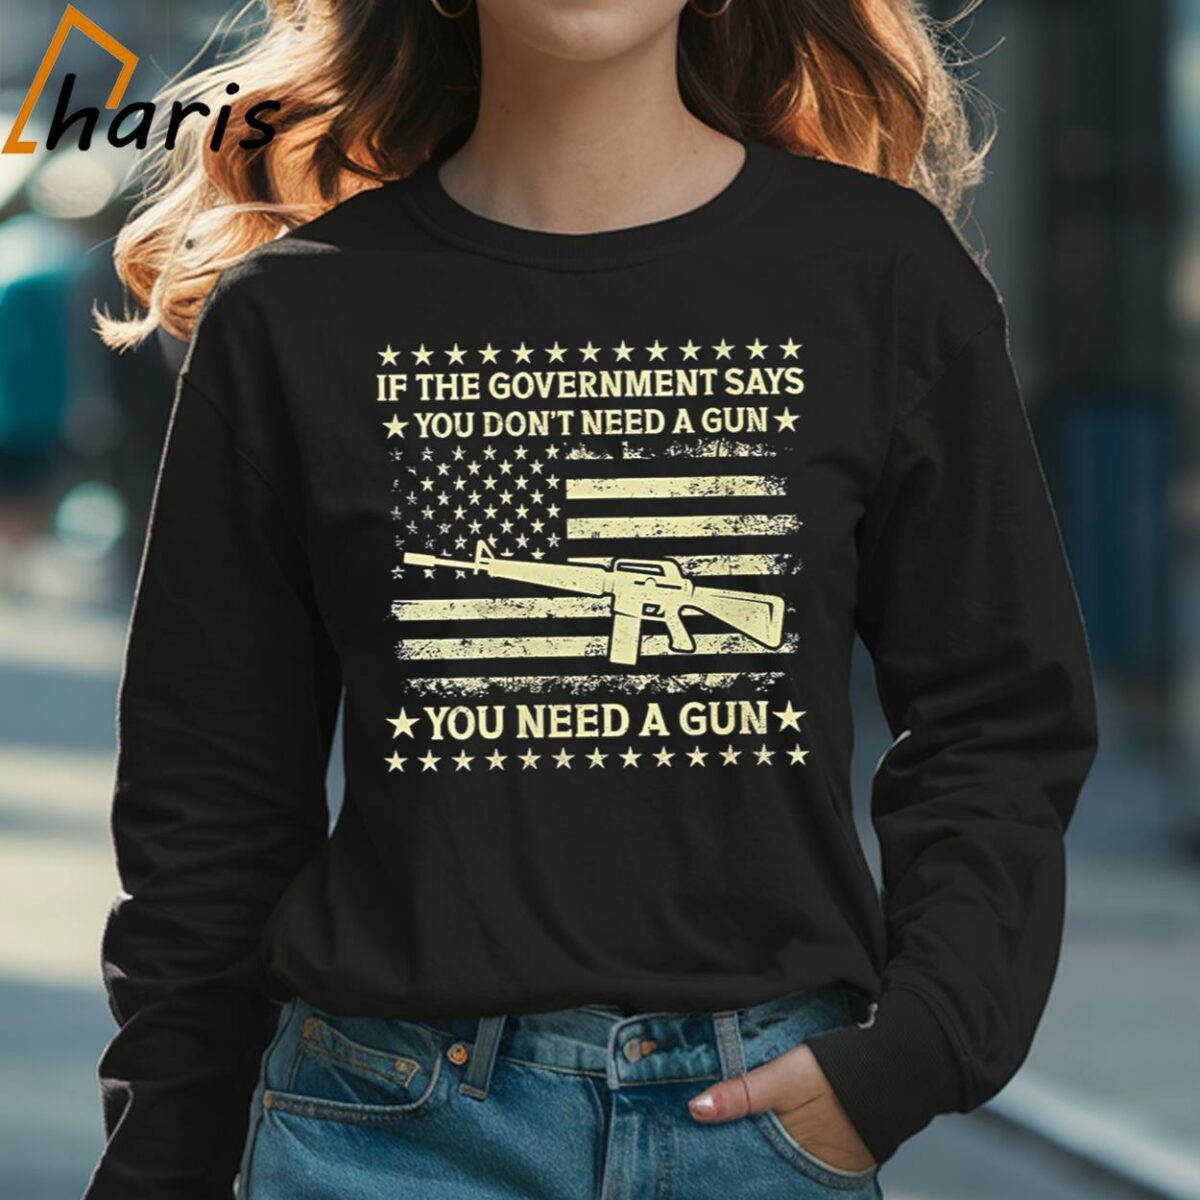 If The Government Says You Dont Need A Gun Flag 4th Of July Shirt 3 Long sleeve shirt